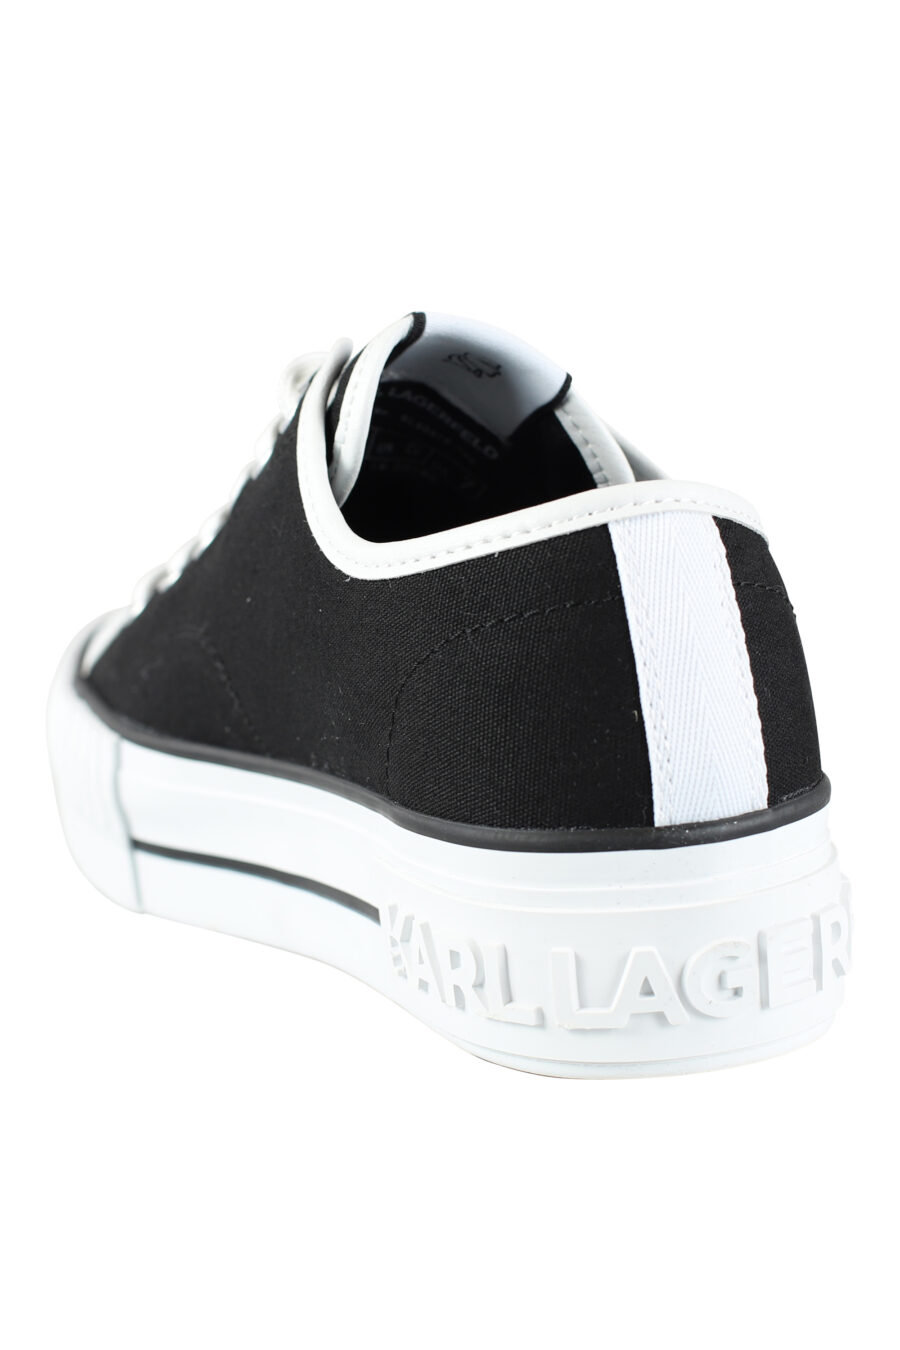 Black converse style trainers with rubber "karl" logo - IMG 9578